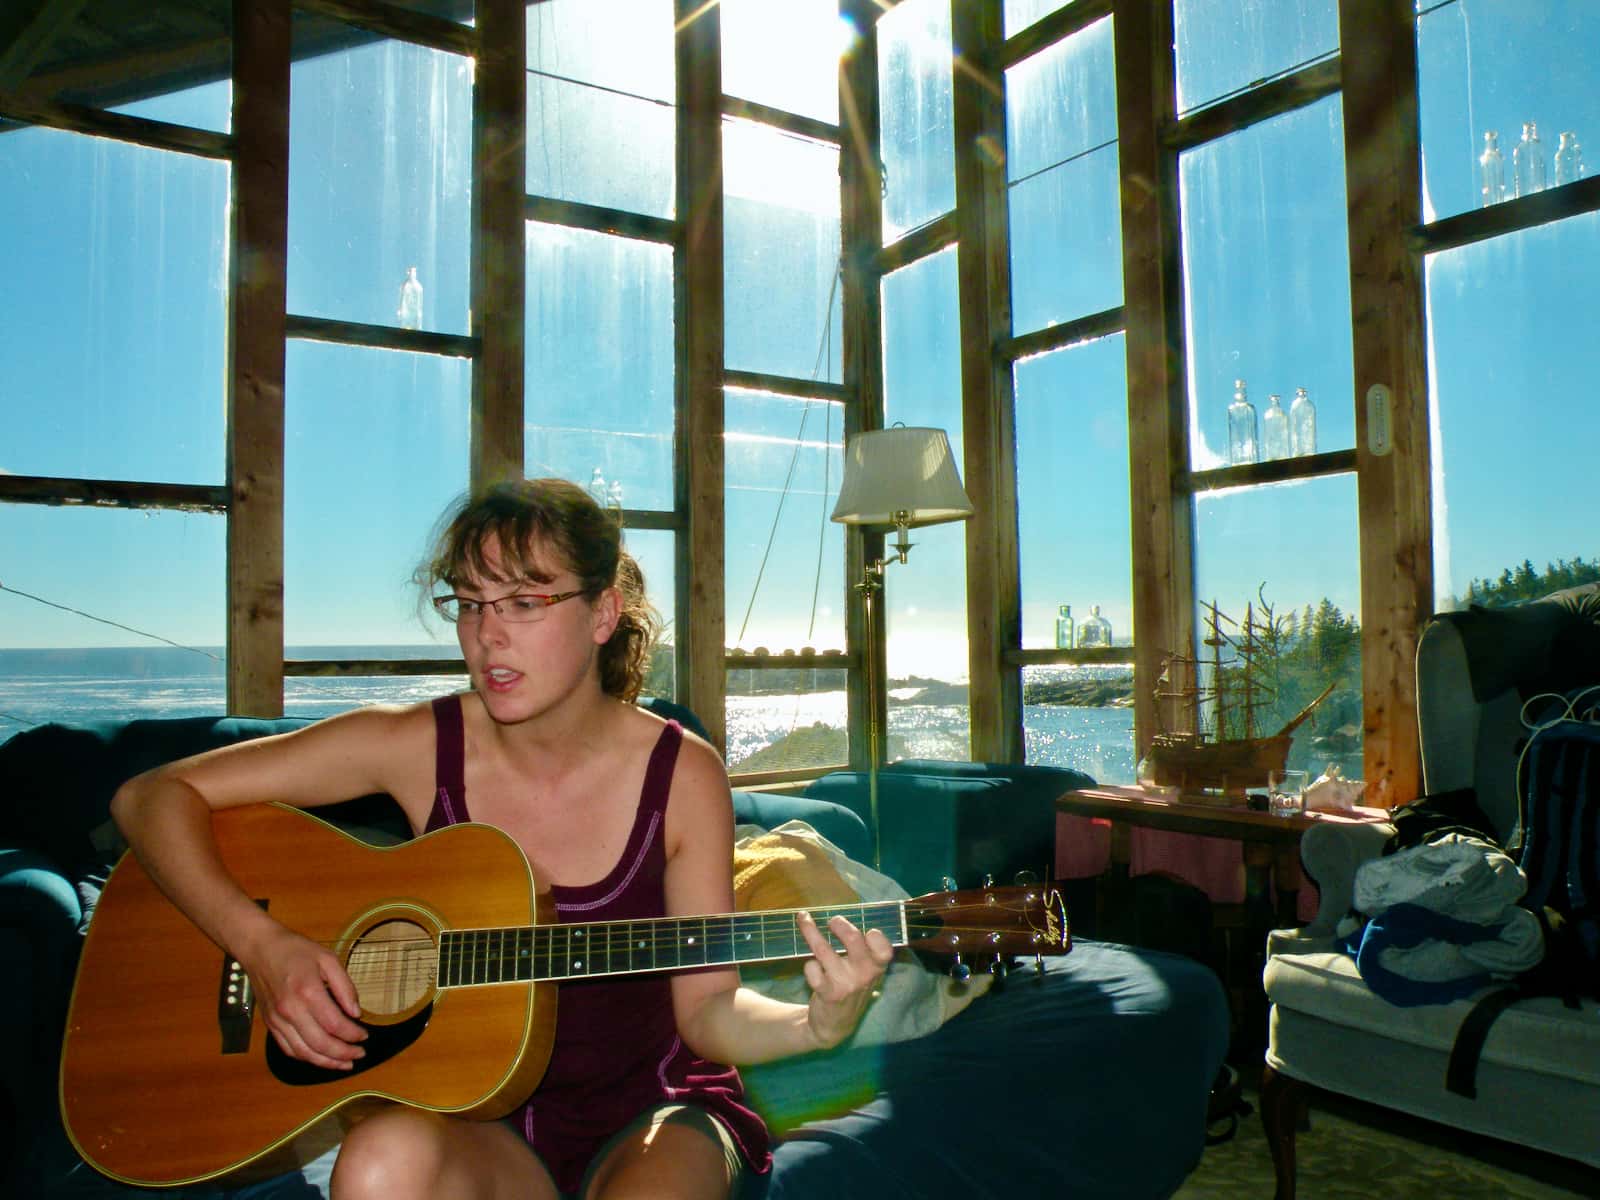 Woman playing guitar in foreground with ocean in background